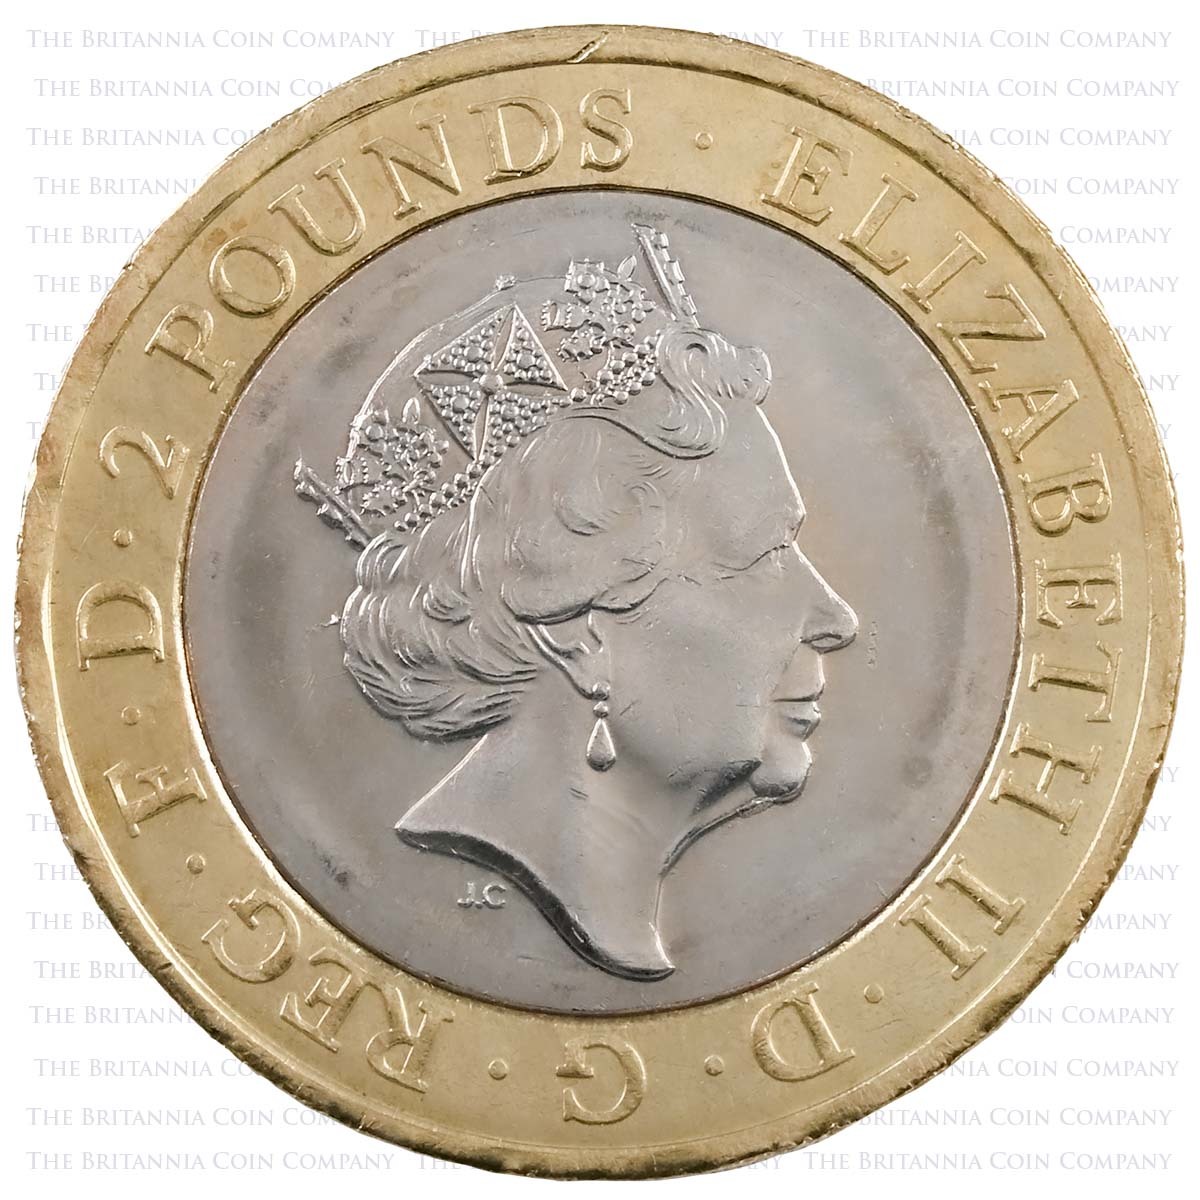 2016 William Shakespeare's Histories Circulated Two Pound Coin Obverse